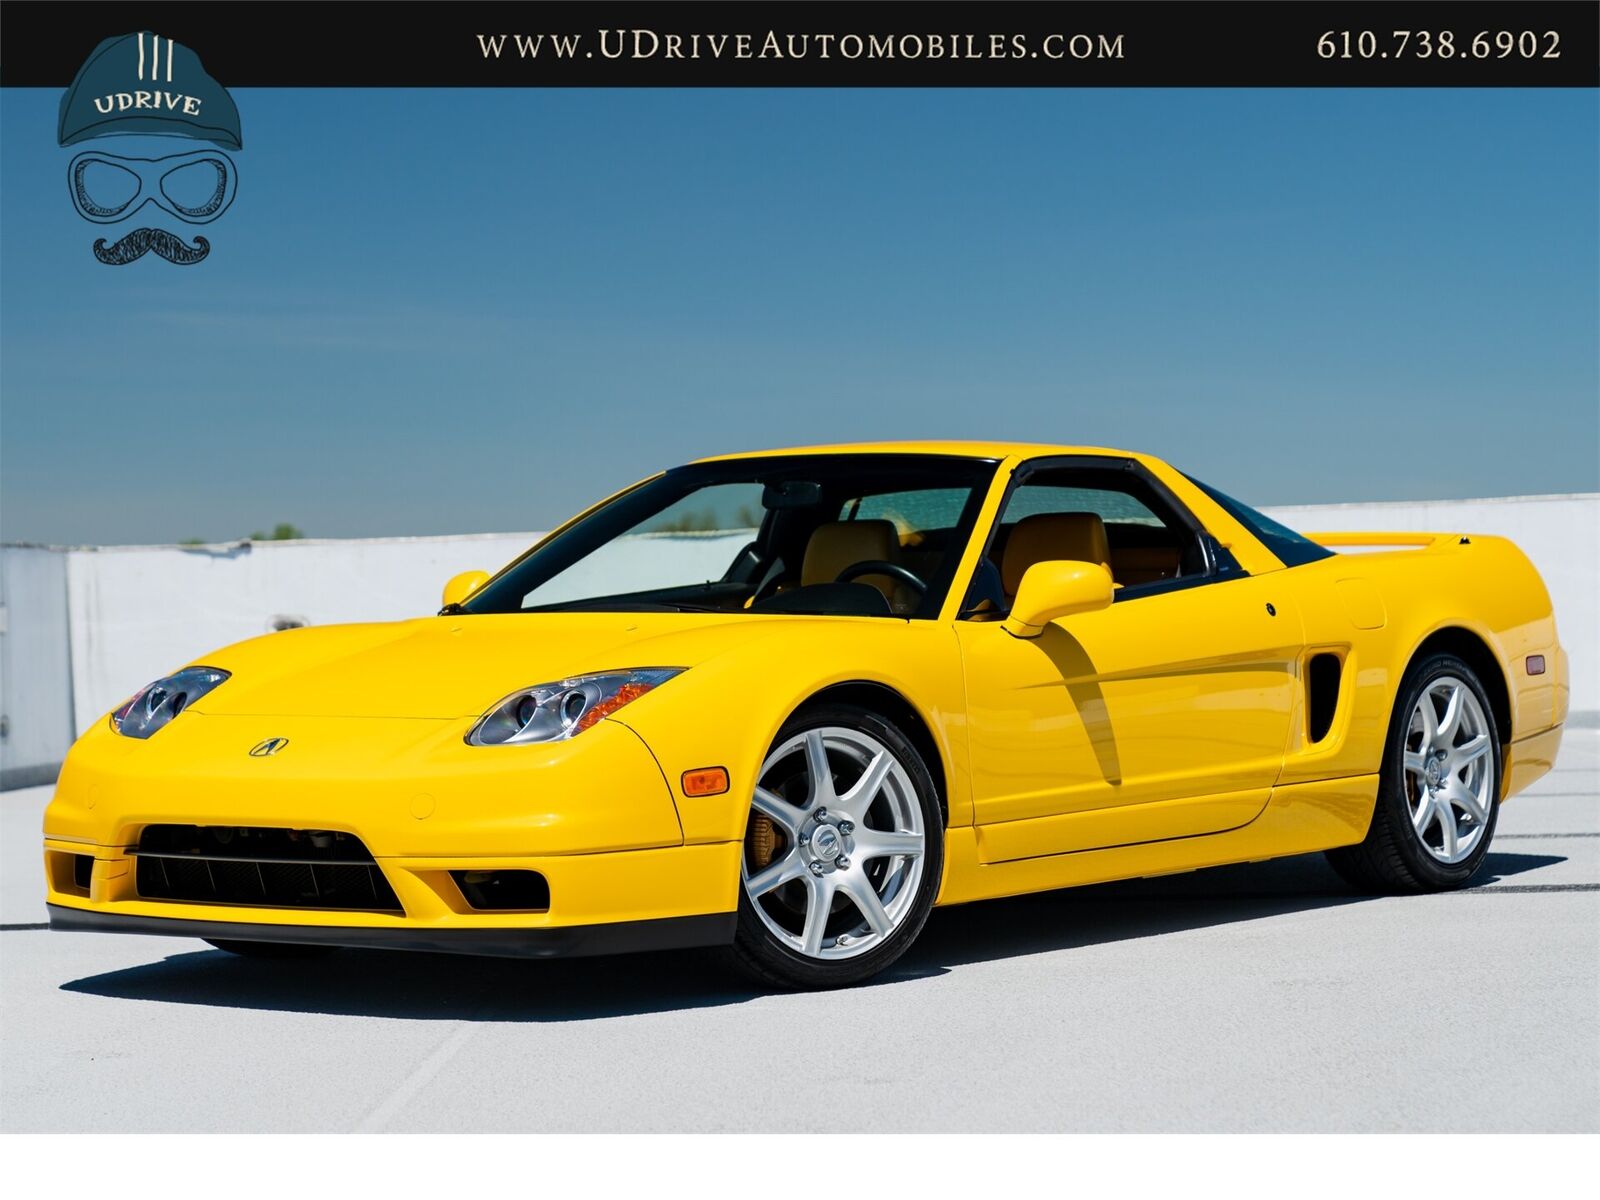 2003 NSX NSX-T Yellow over Yellow 1 of 13 Produced